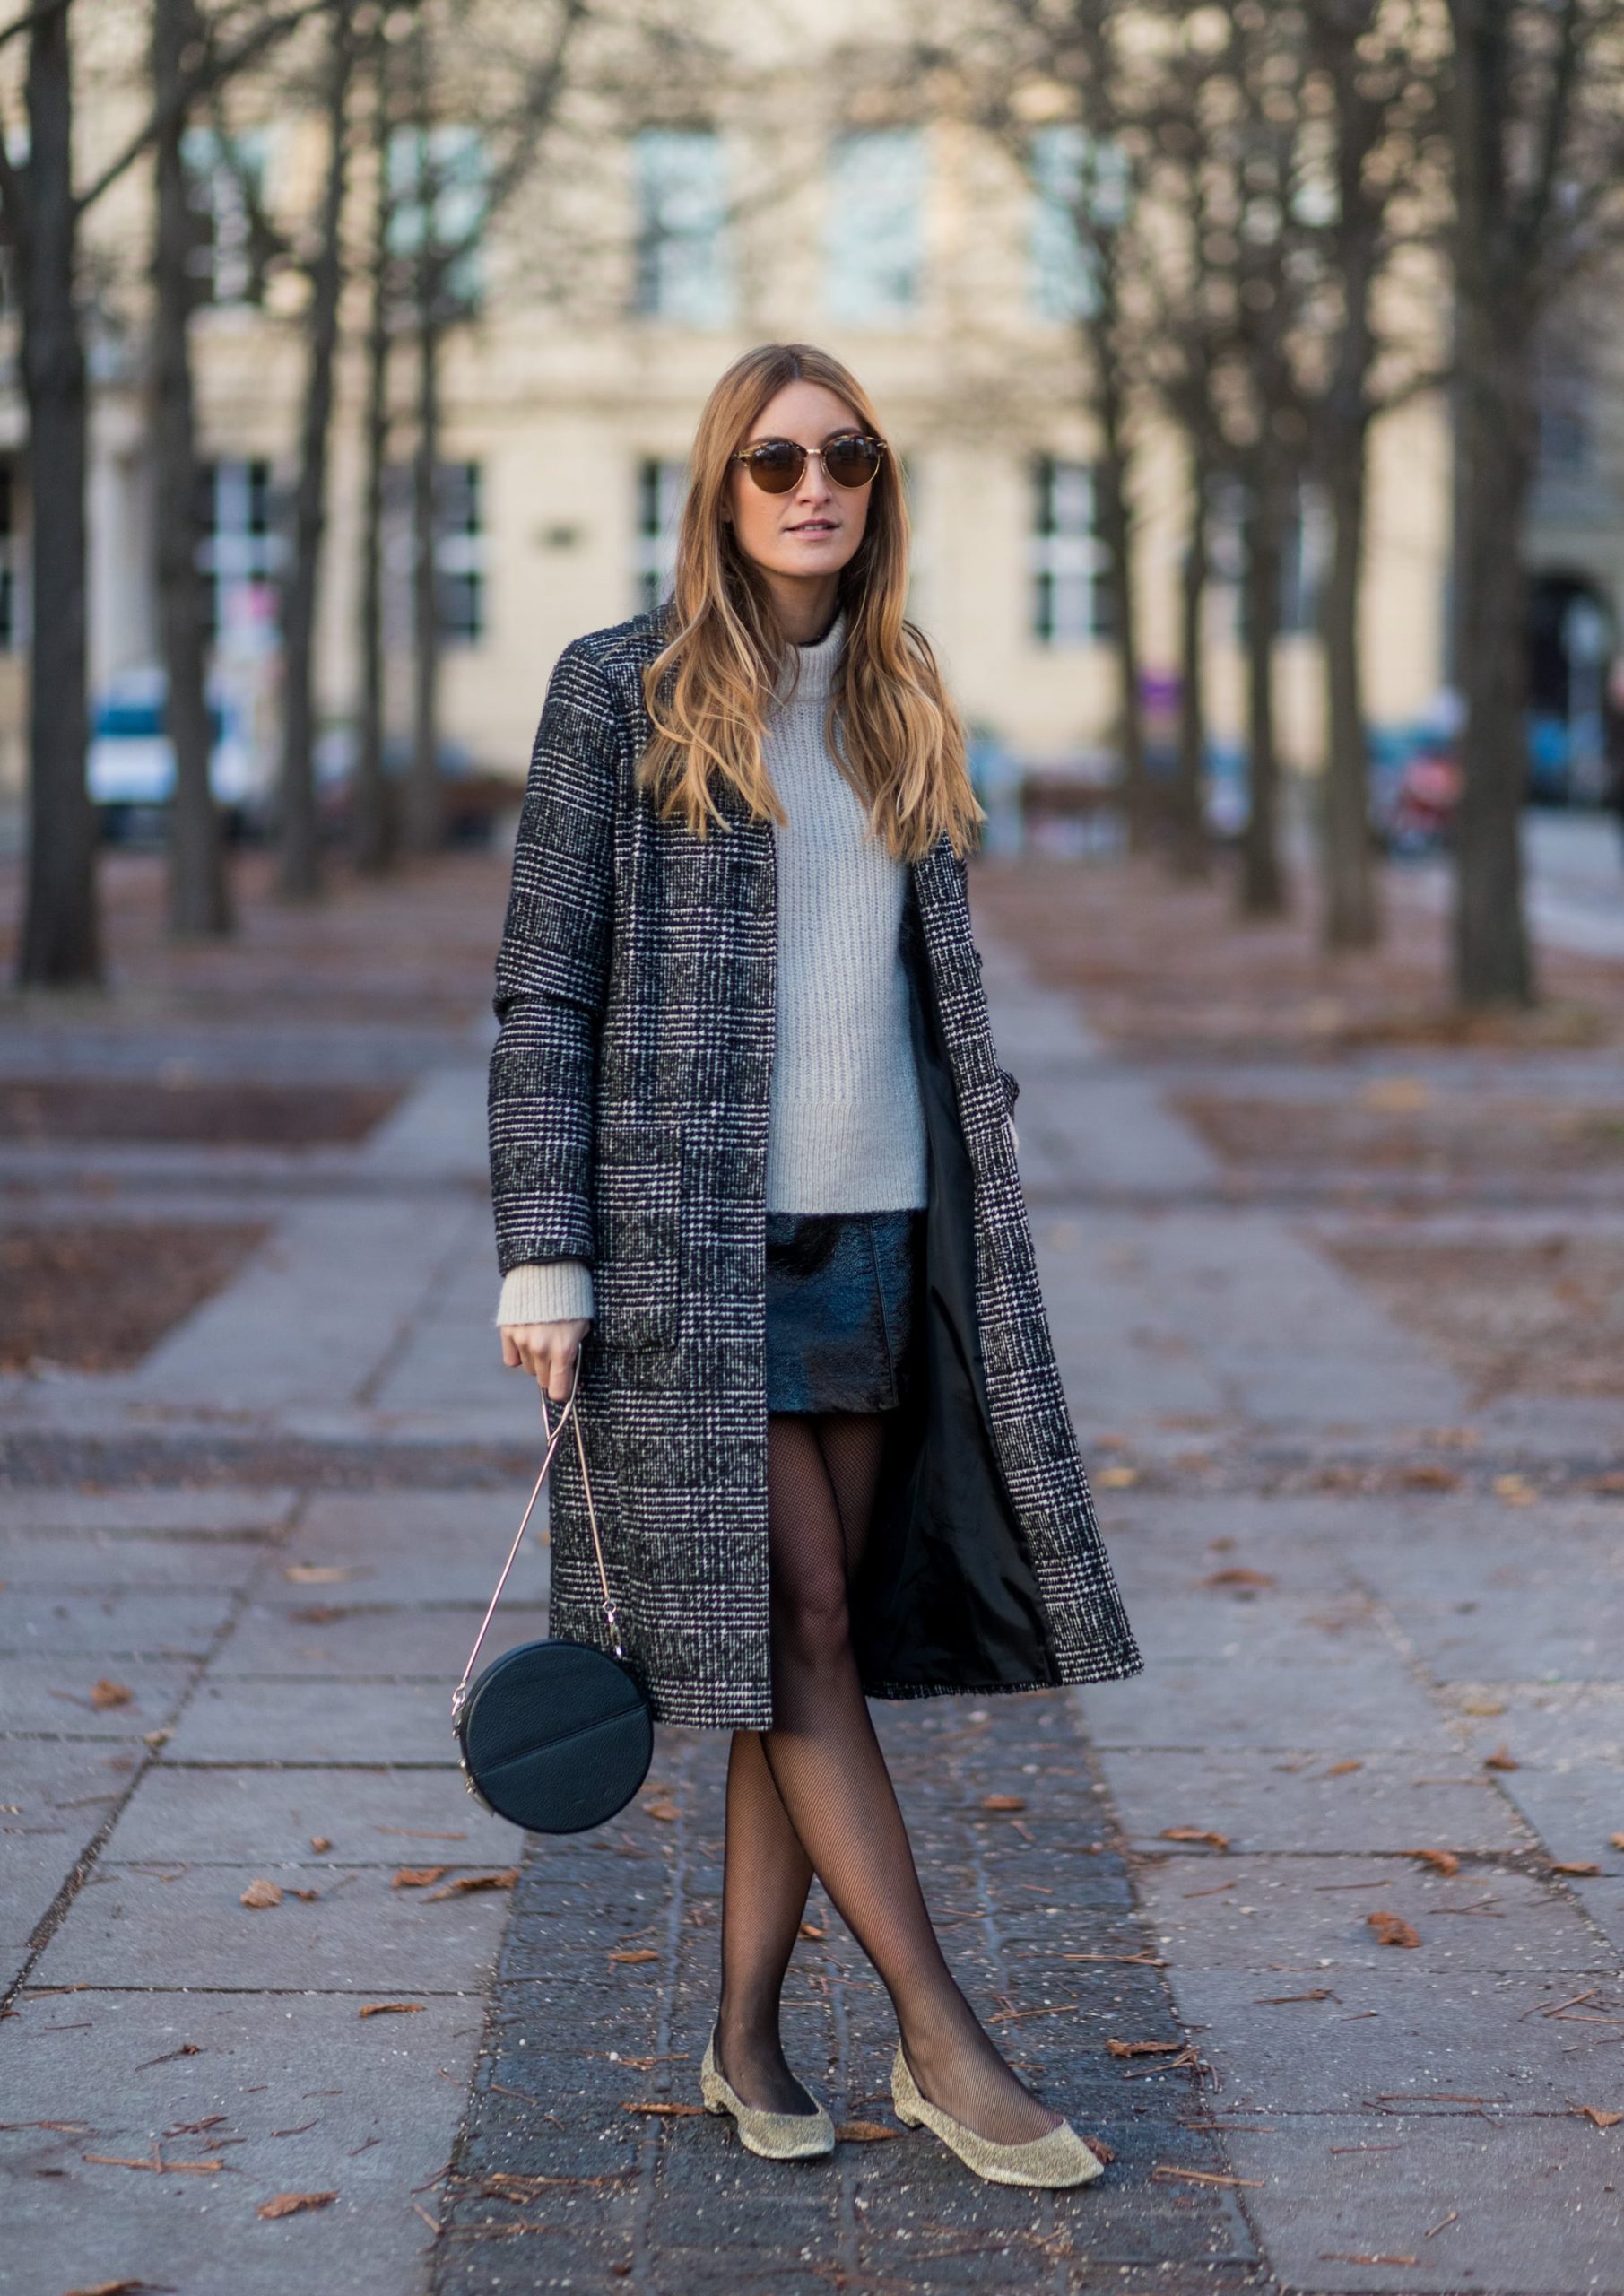 Top 5 Style Hacks for Winter